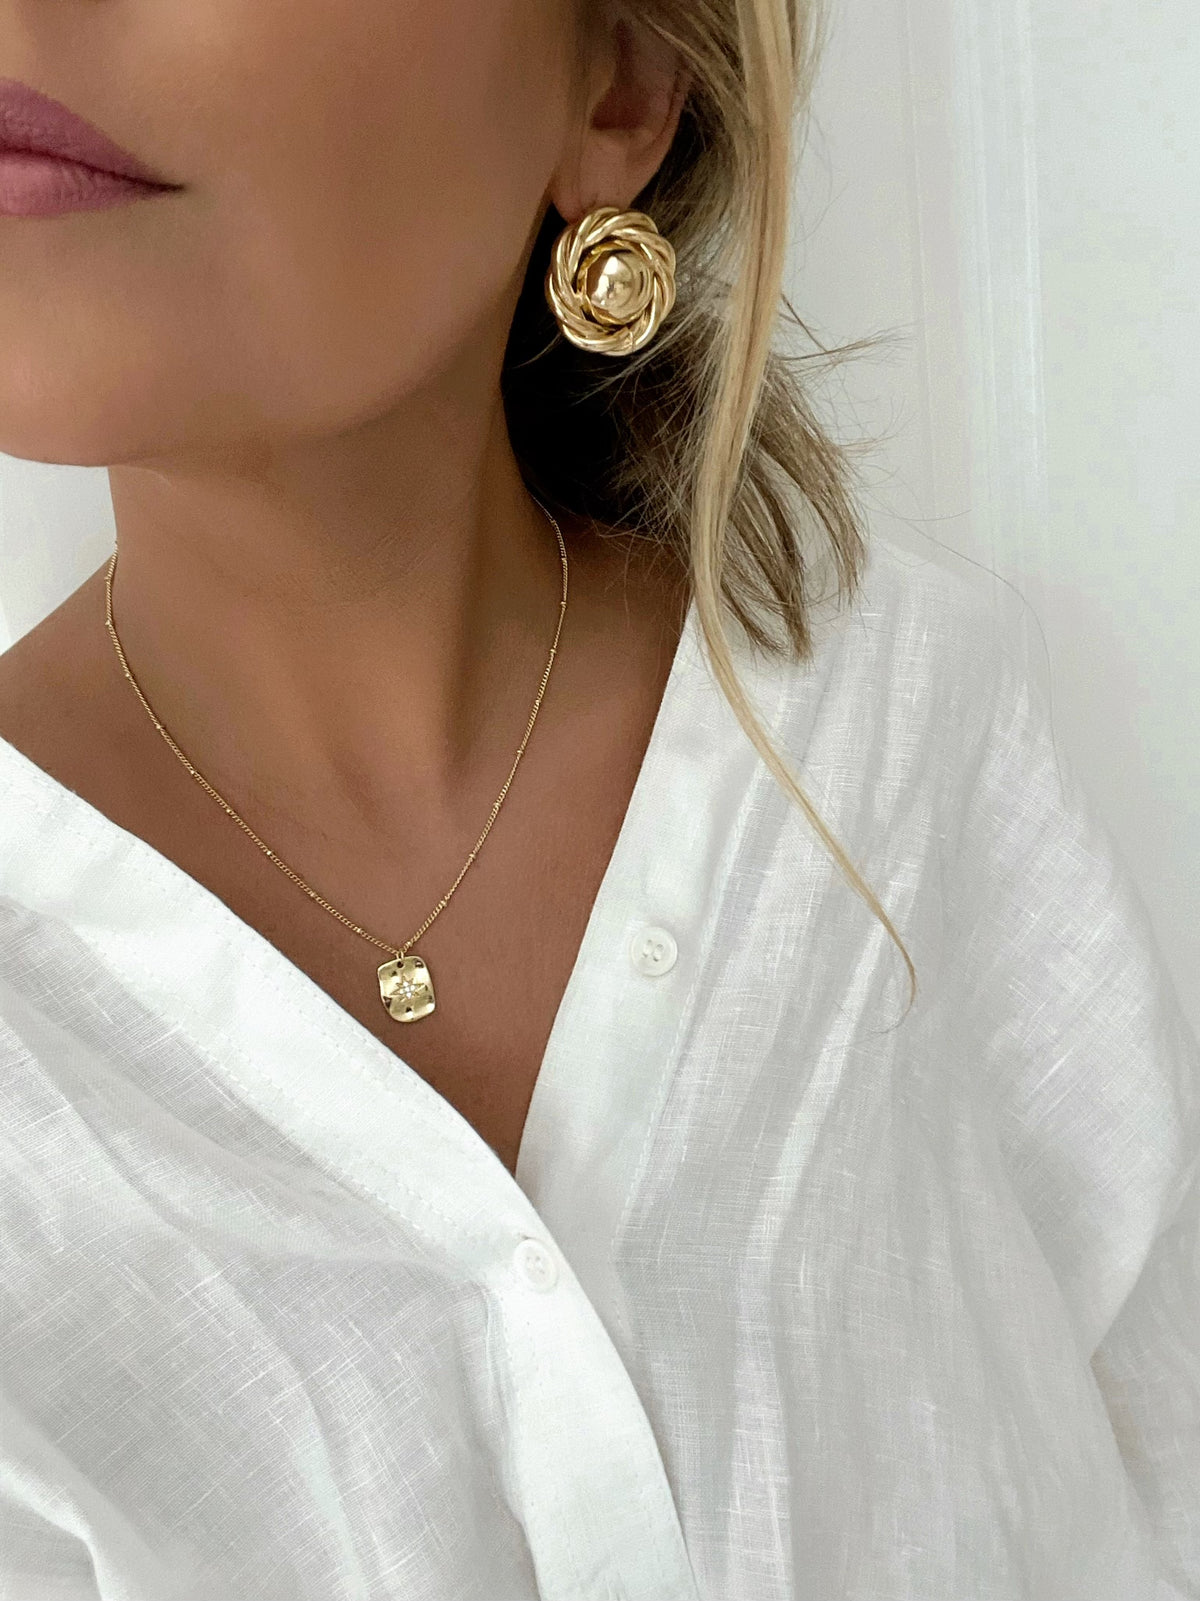 Vintage-inspired gold button earrings with twisted border design, showcasing timeless elegance for modern women.